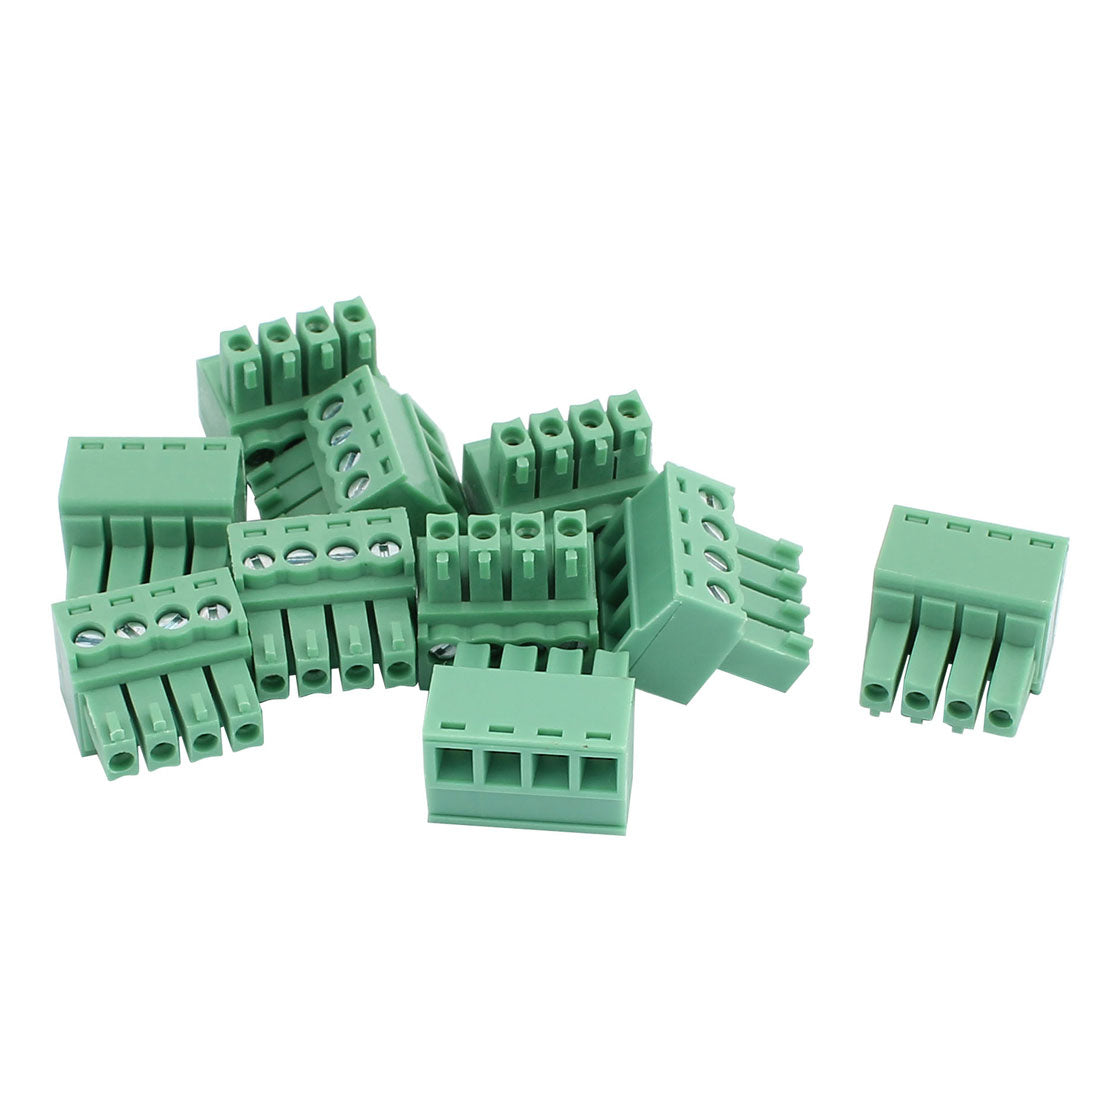 uxcell Uxcell 10Pcs 300V KF2EDGK 3.5mm Pitch 4-Pin PCB Screw Terminal Block Connector